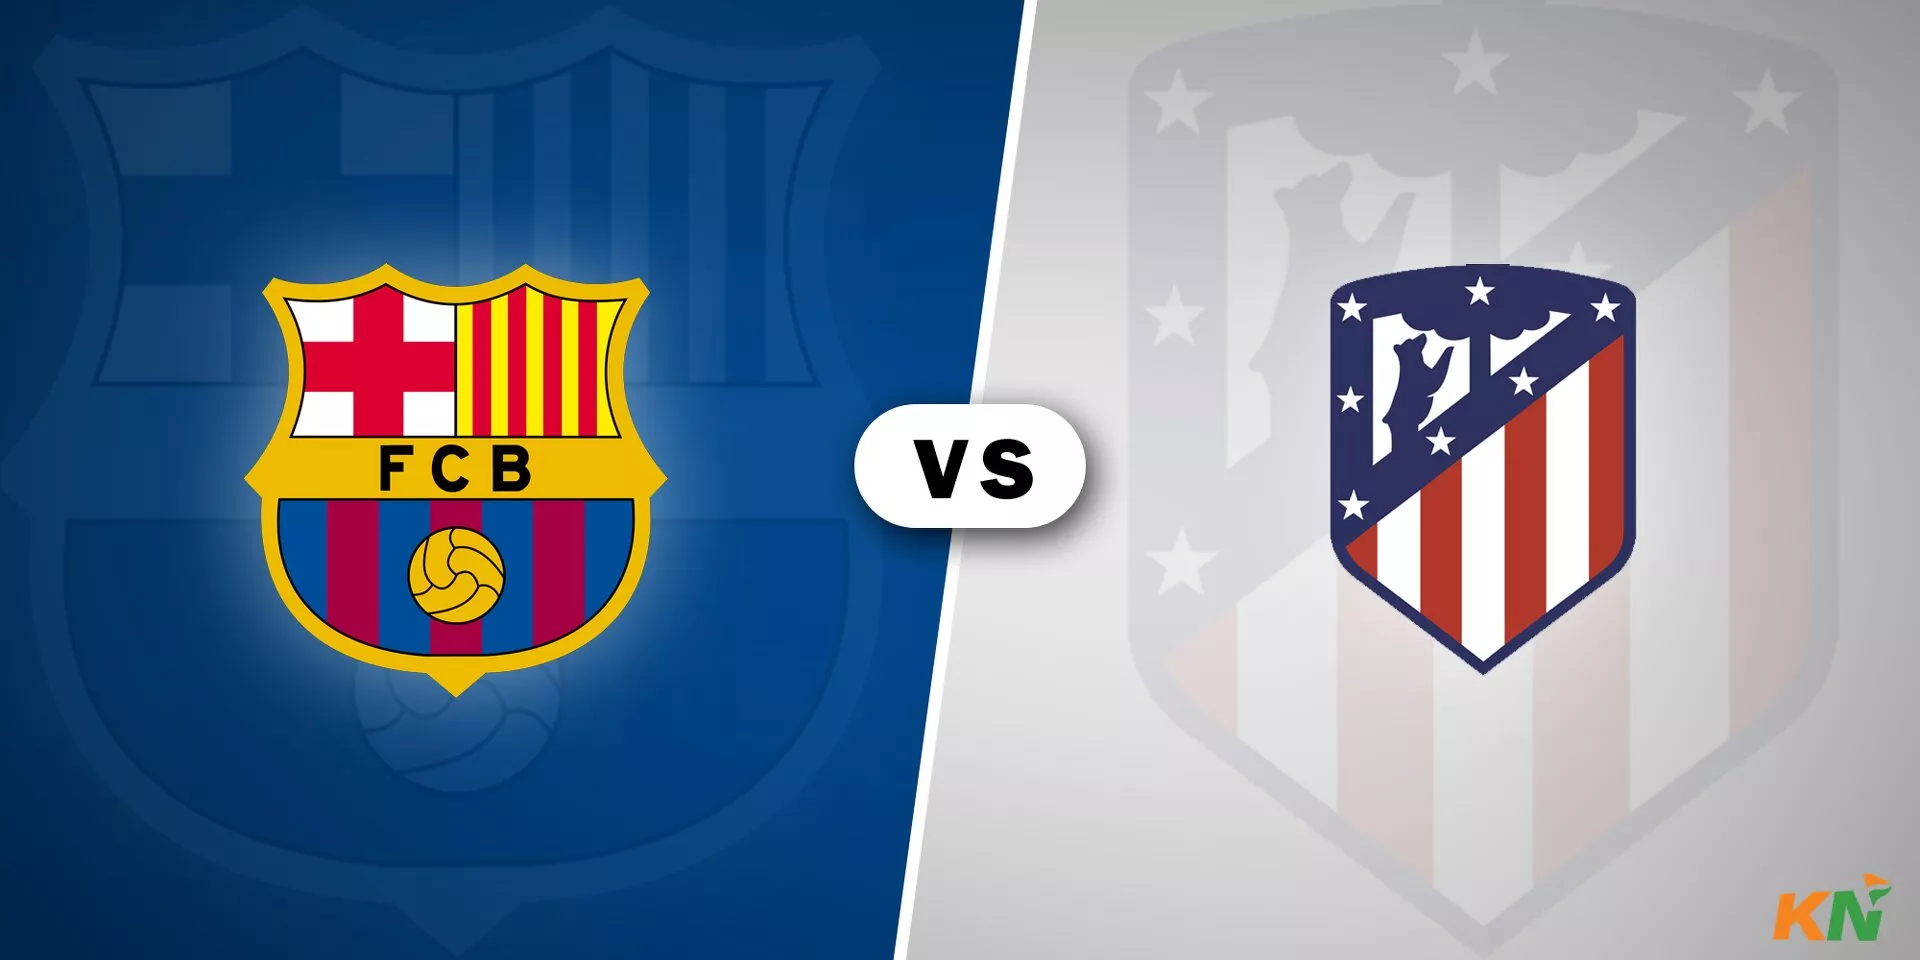 Barcelona vs Atletico Madrid: Where and how to watch?